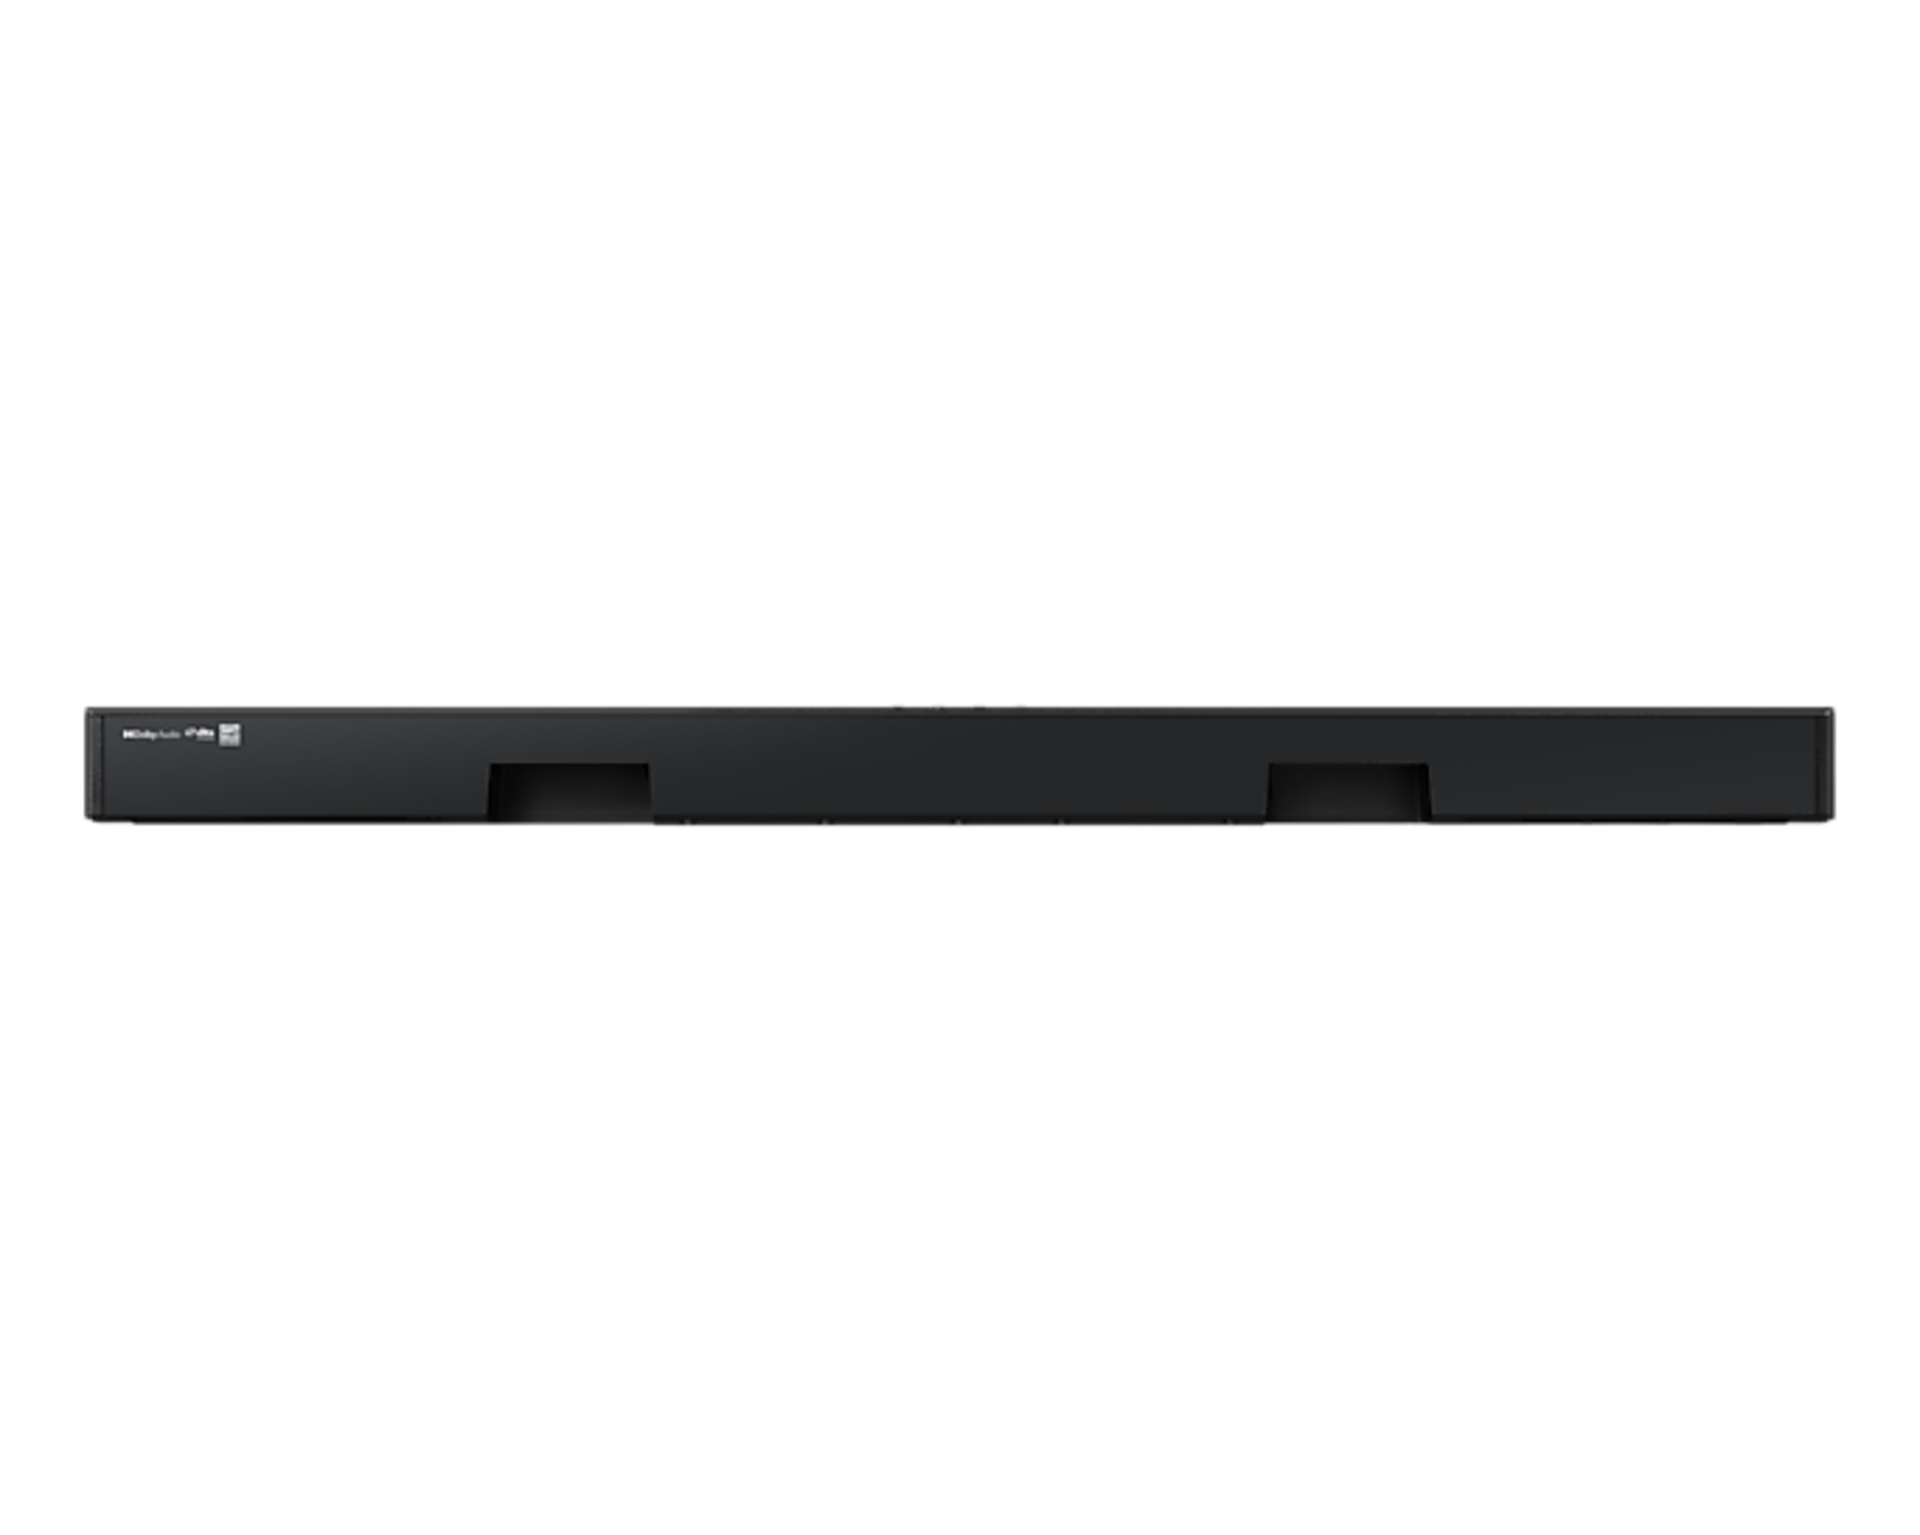 SAMSUNG HW-B430 BLUETOOTH 2.1 SOUNDBAR AND WIRELESS SUBWOOFER IN BLACK - RRP £199 - Image 6 of 13